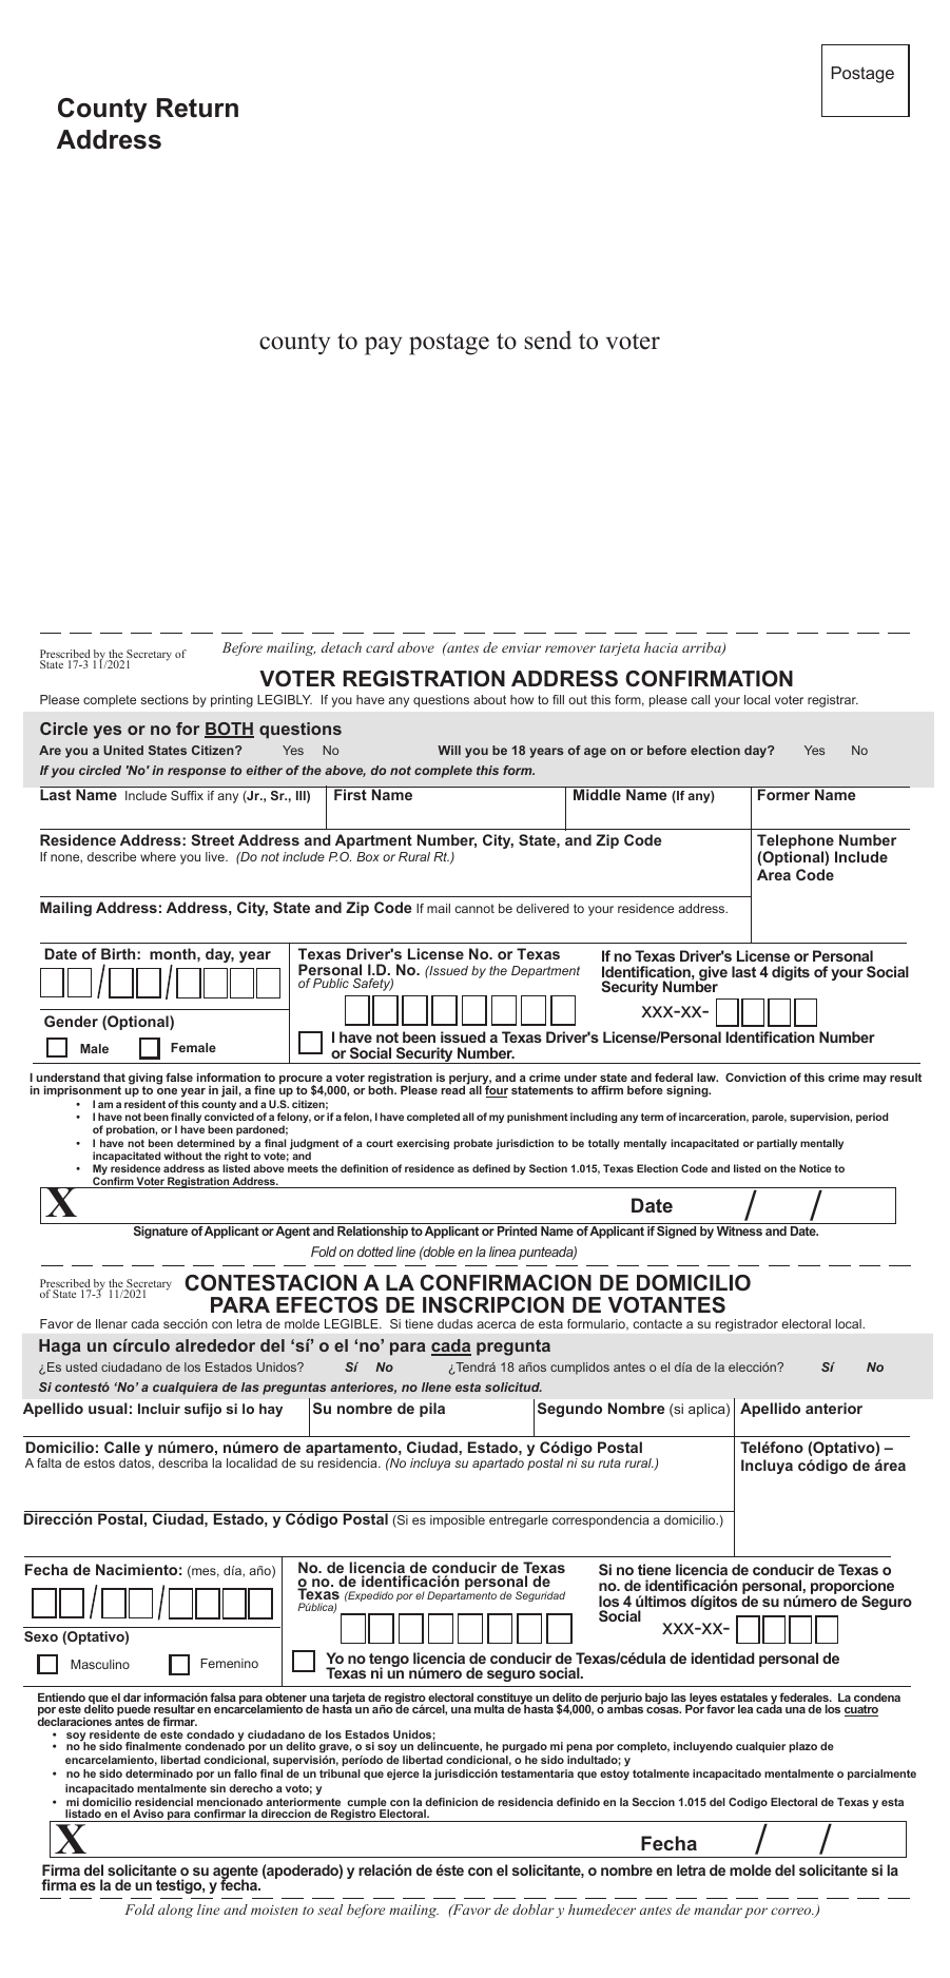 Form 17-3 Voter Registration Address Confirmation - Texas (English / Spanish), Page 1